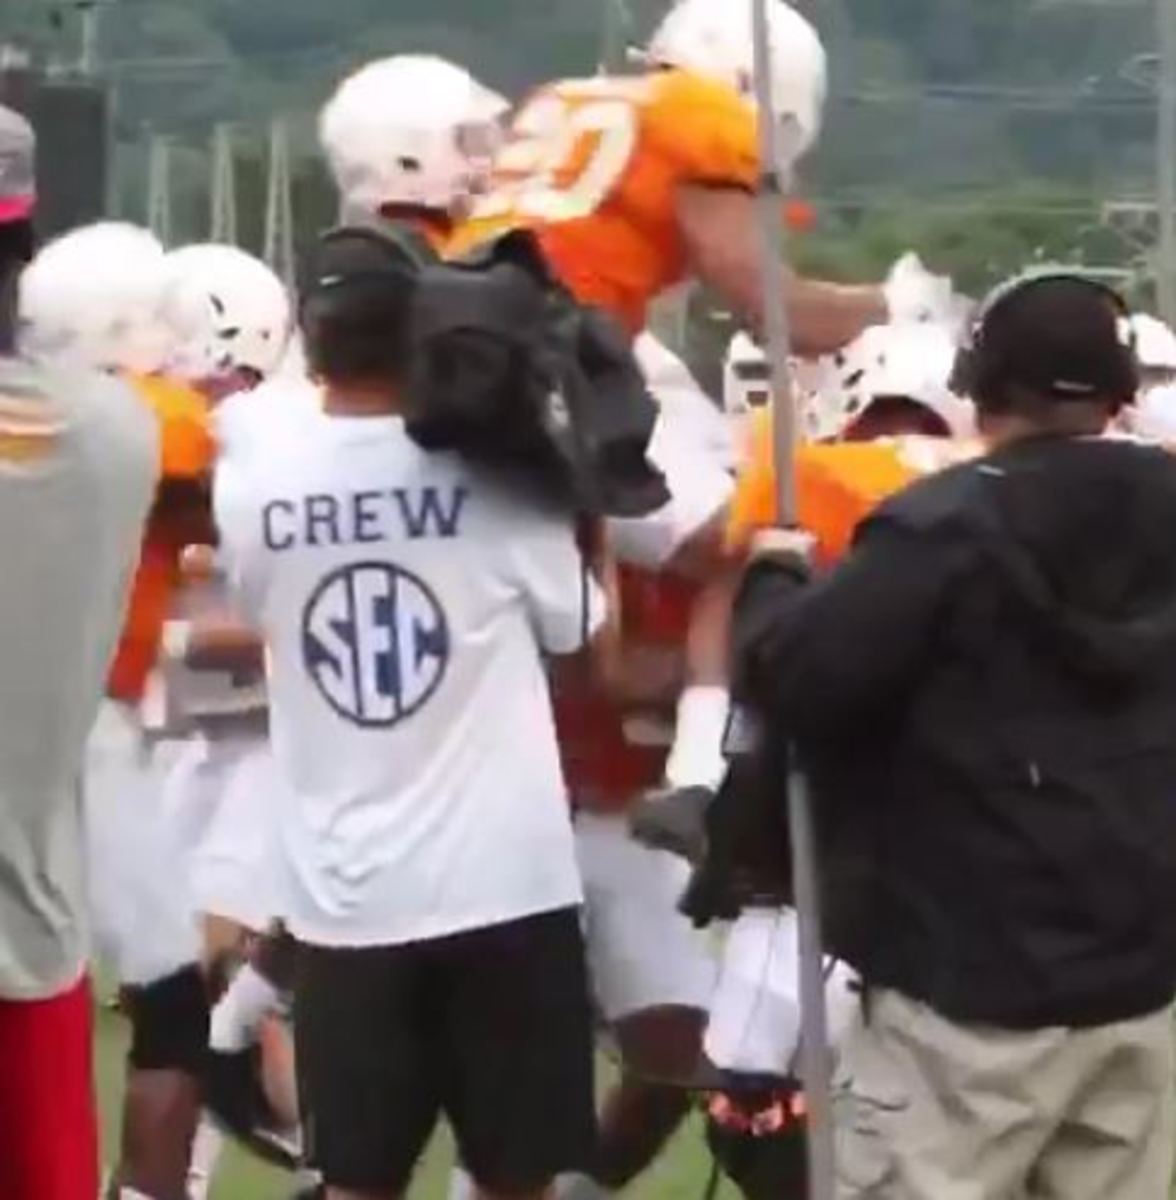 Tennessee players swarm together at practice.